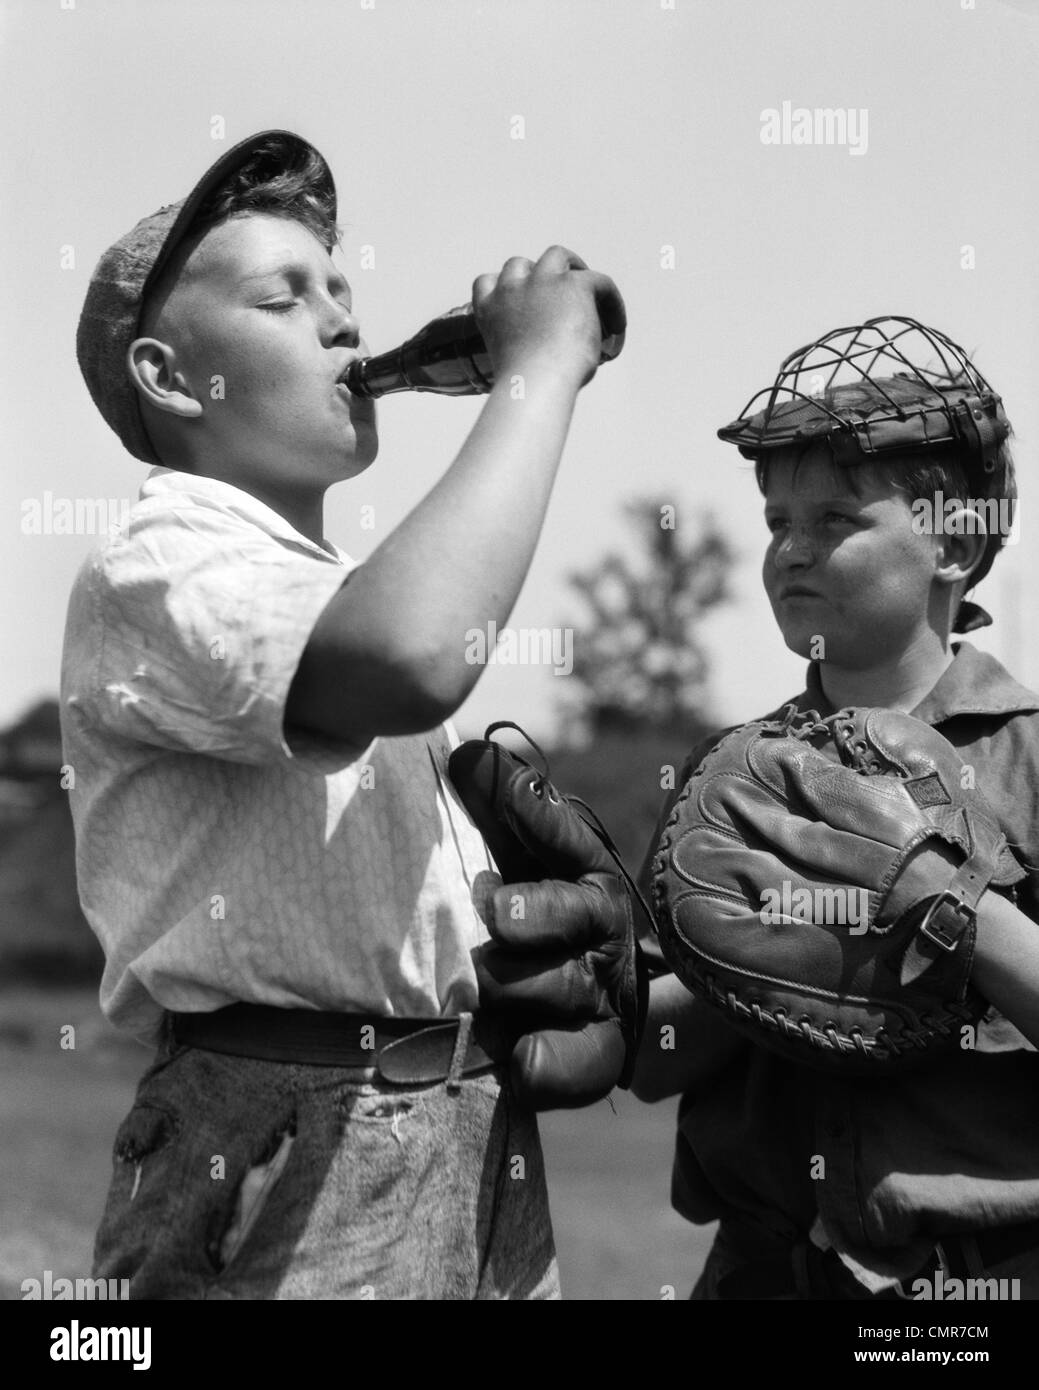 1930s PAIR OF BOYS WEARING BASEBALL GLOVES ONE WITH CATCHER'S MASK WATCHING OTHER WEARING CAP DRINK BOTTLE OF SODA Stock Photo